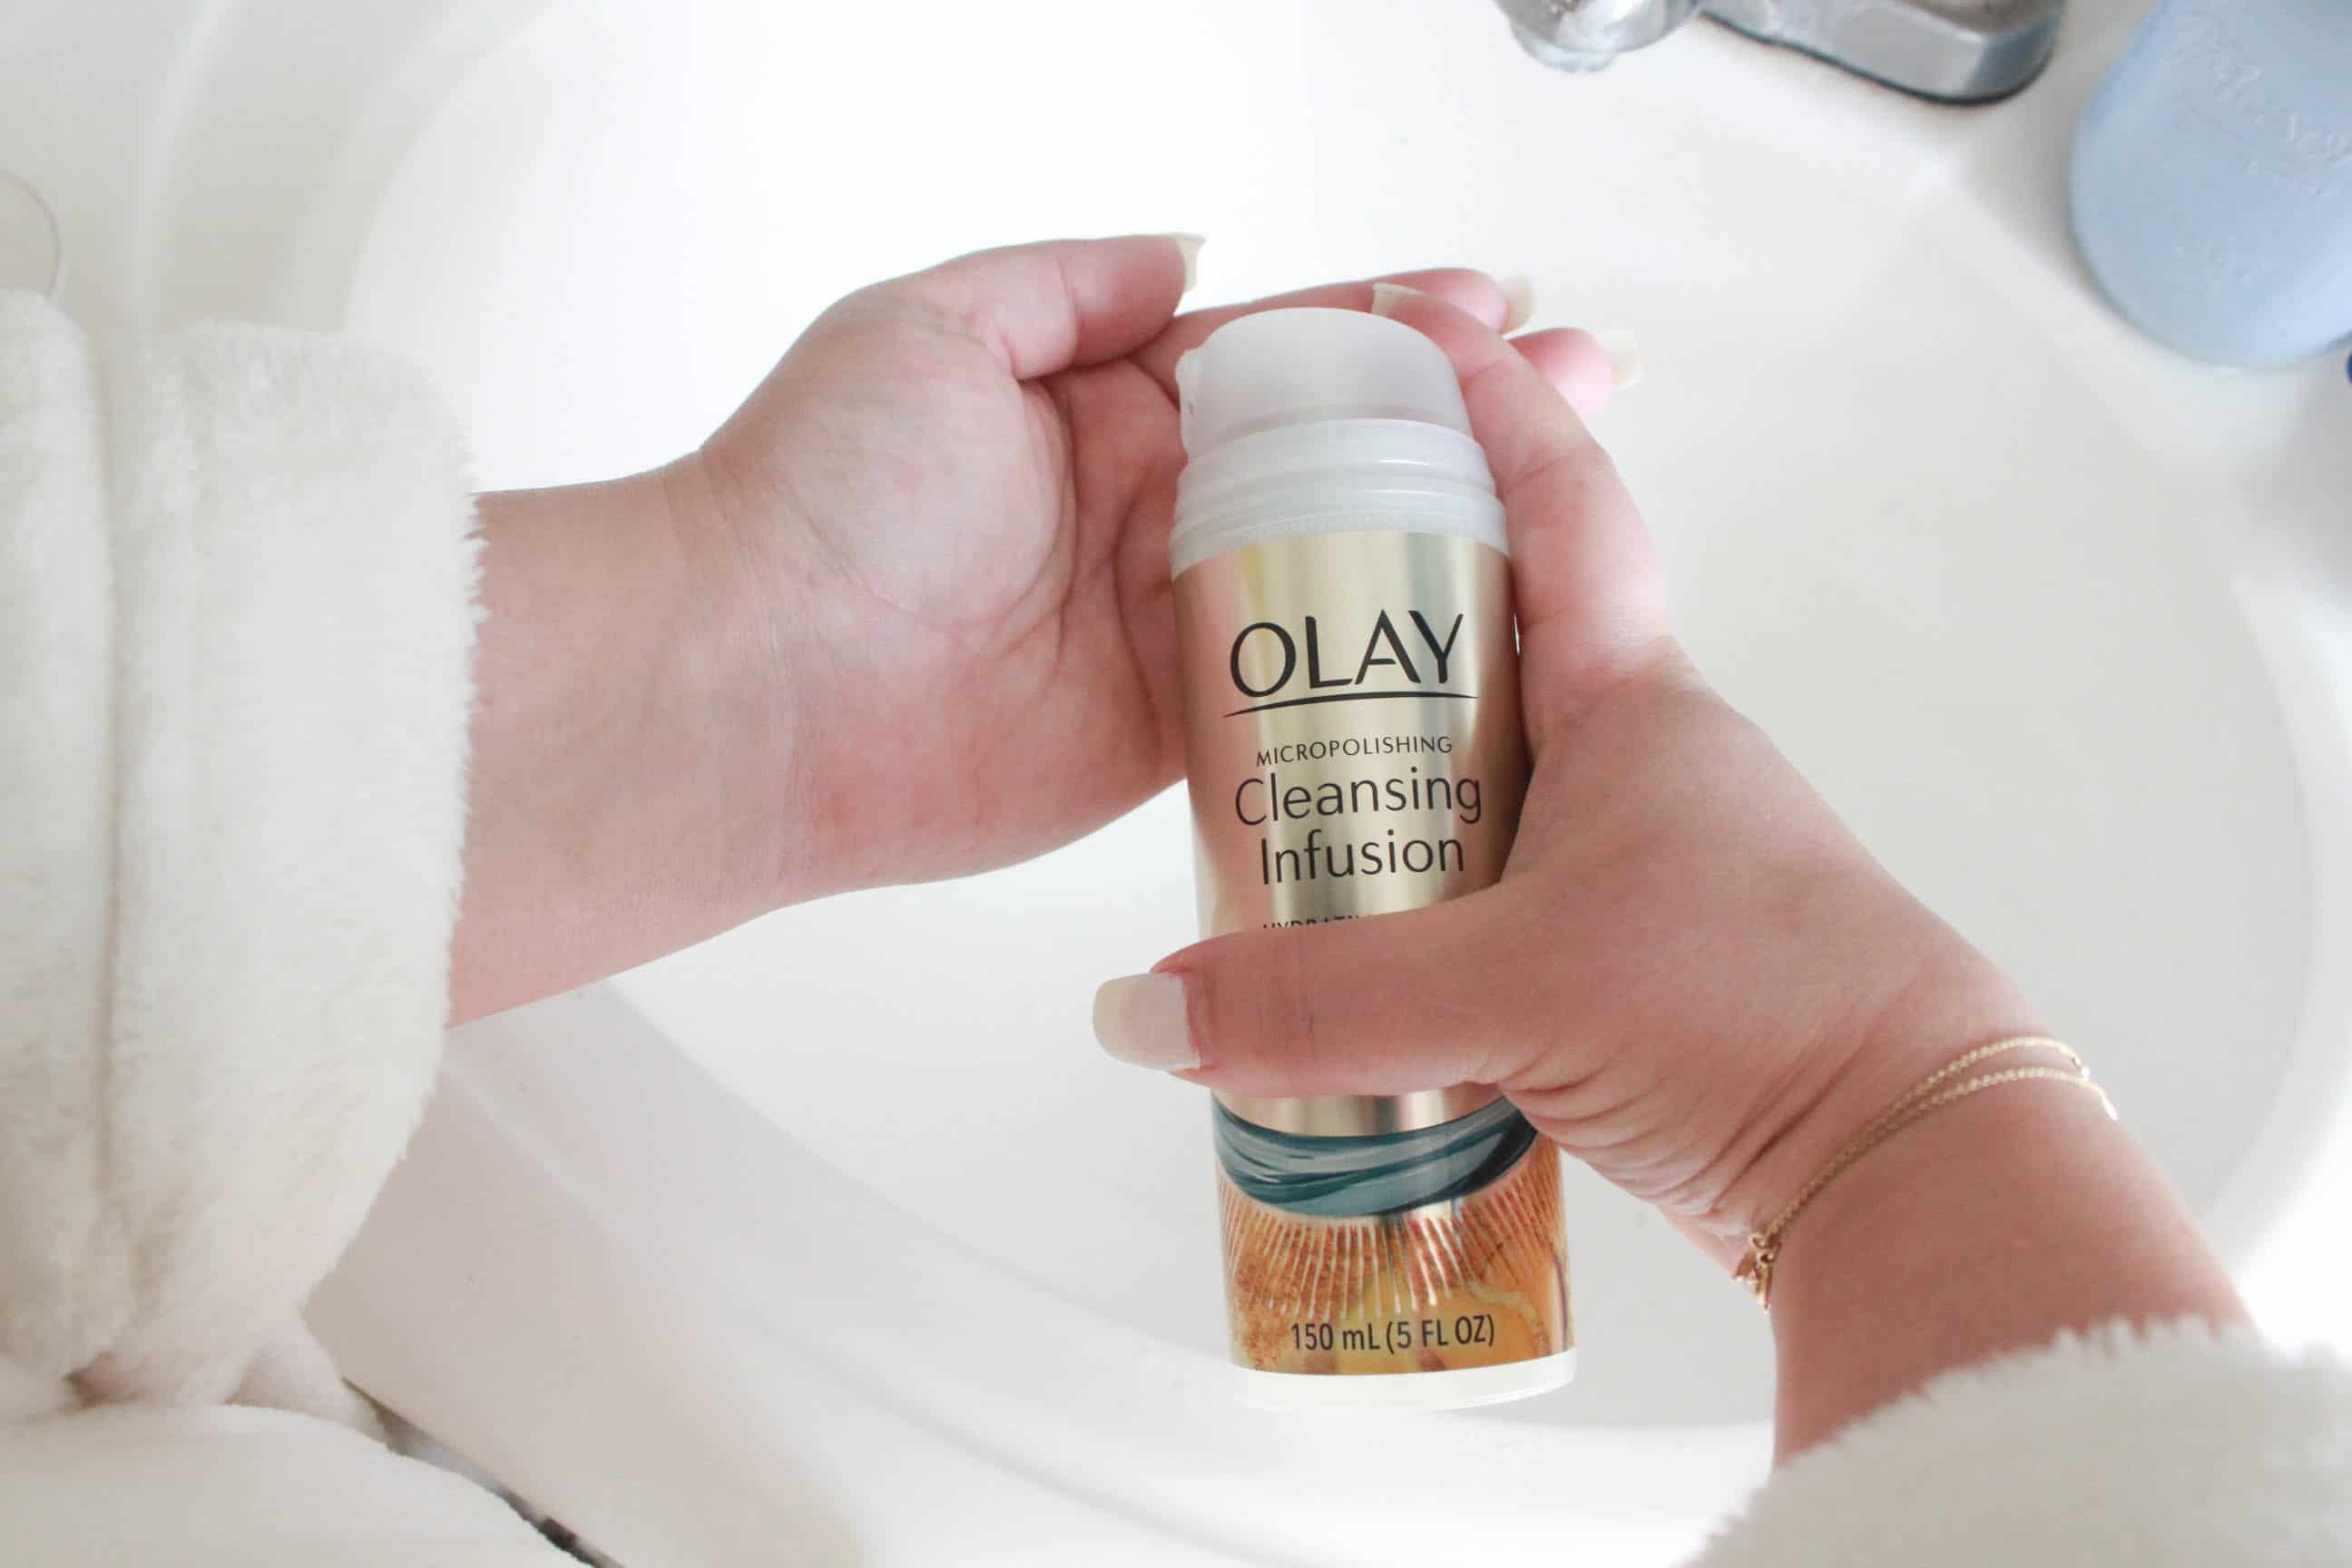 missyonmadison, missyonmadison blog, missyonmadison instagram, olay, olay skincare, olay infusions, olay cleansing infusions, bloglovin, la blogger, beauty blogger, beauty blog, beauty tips, skincare routine, skincare tutorial, olay glow up, glow up,